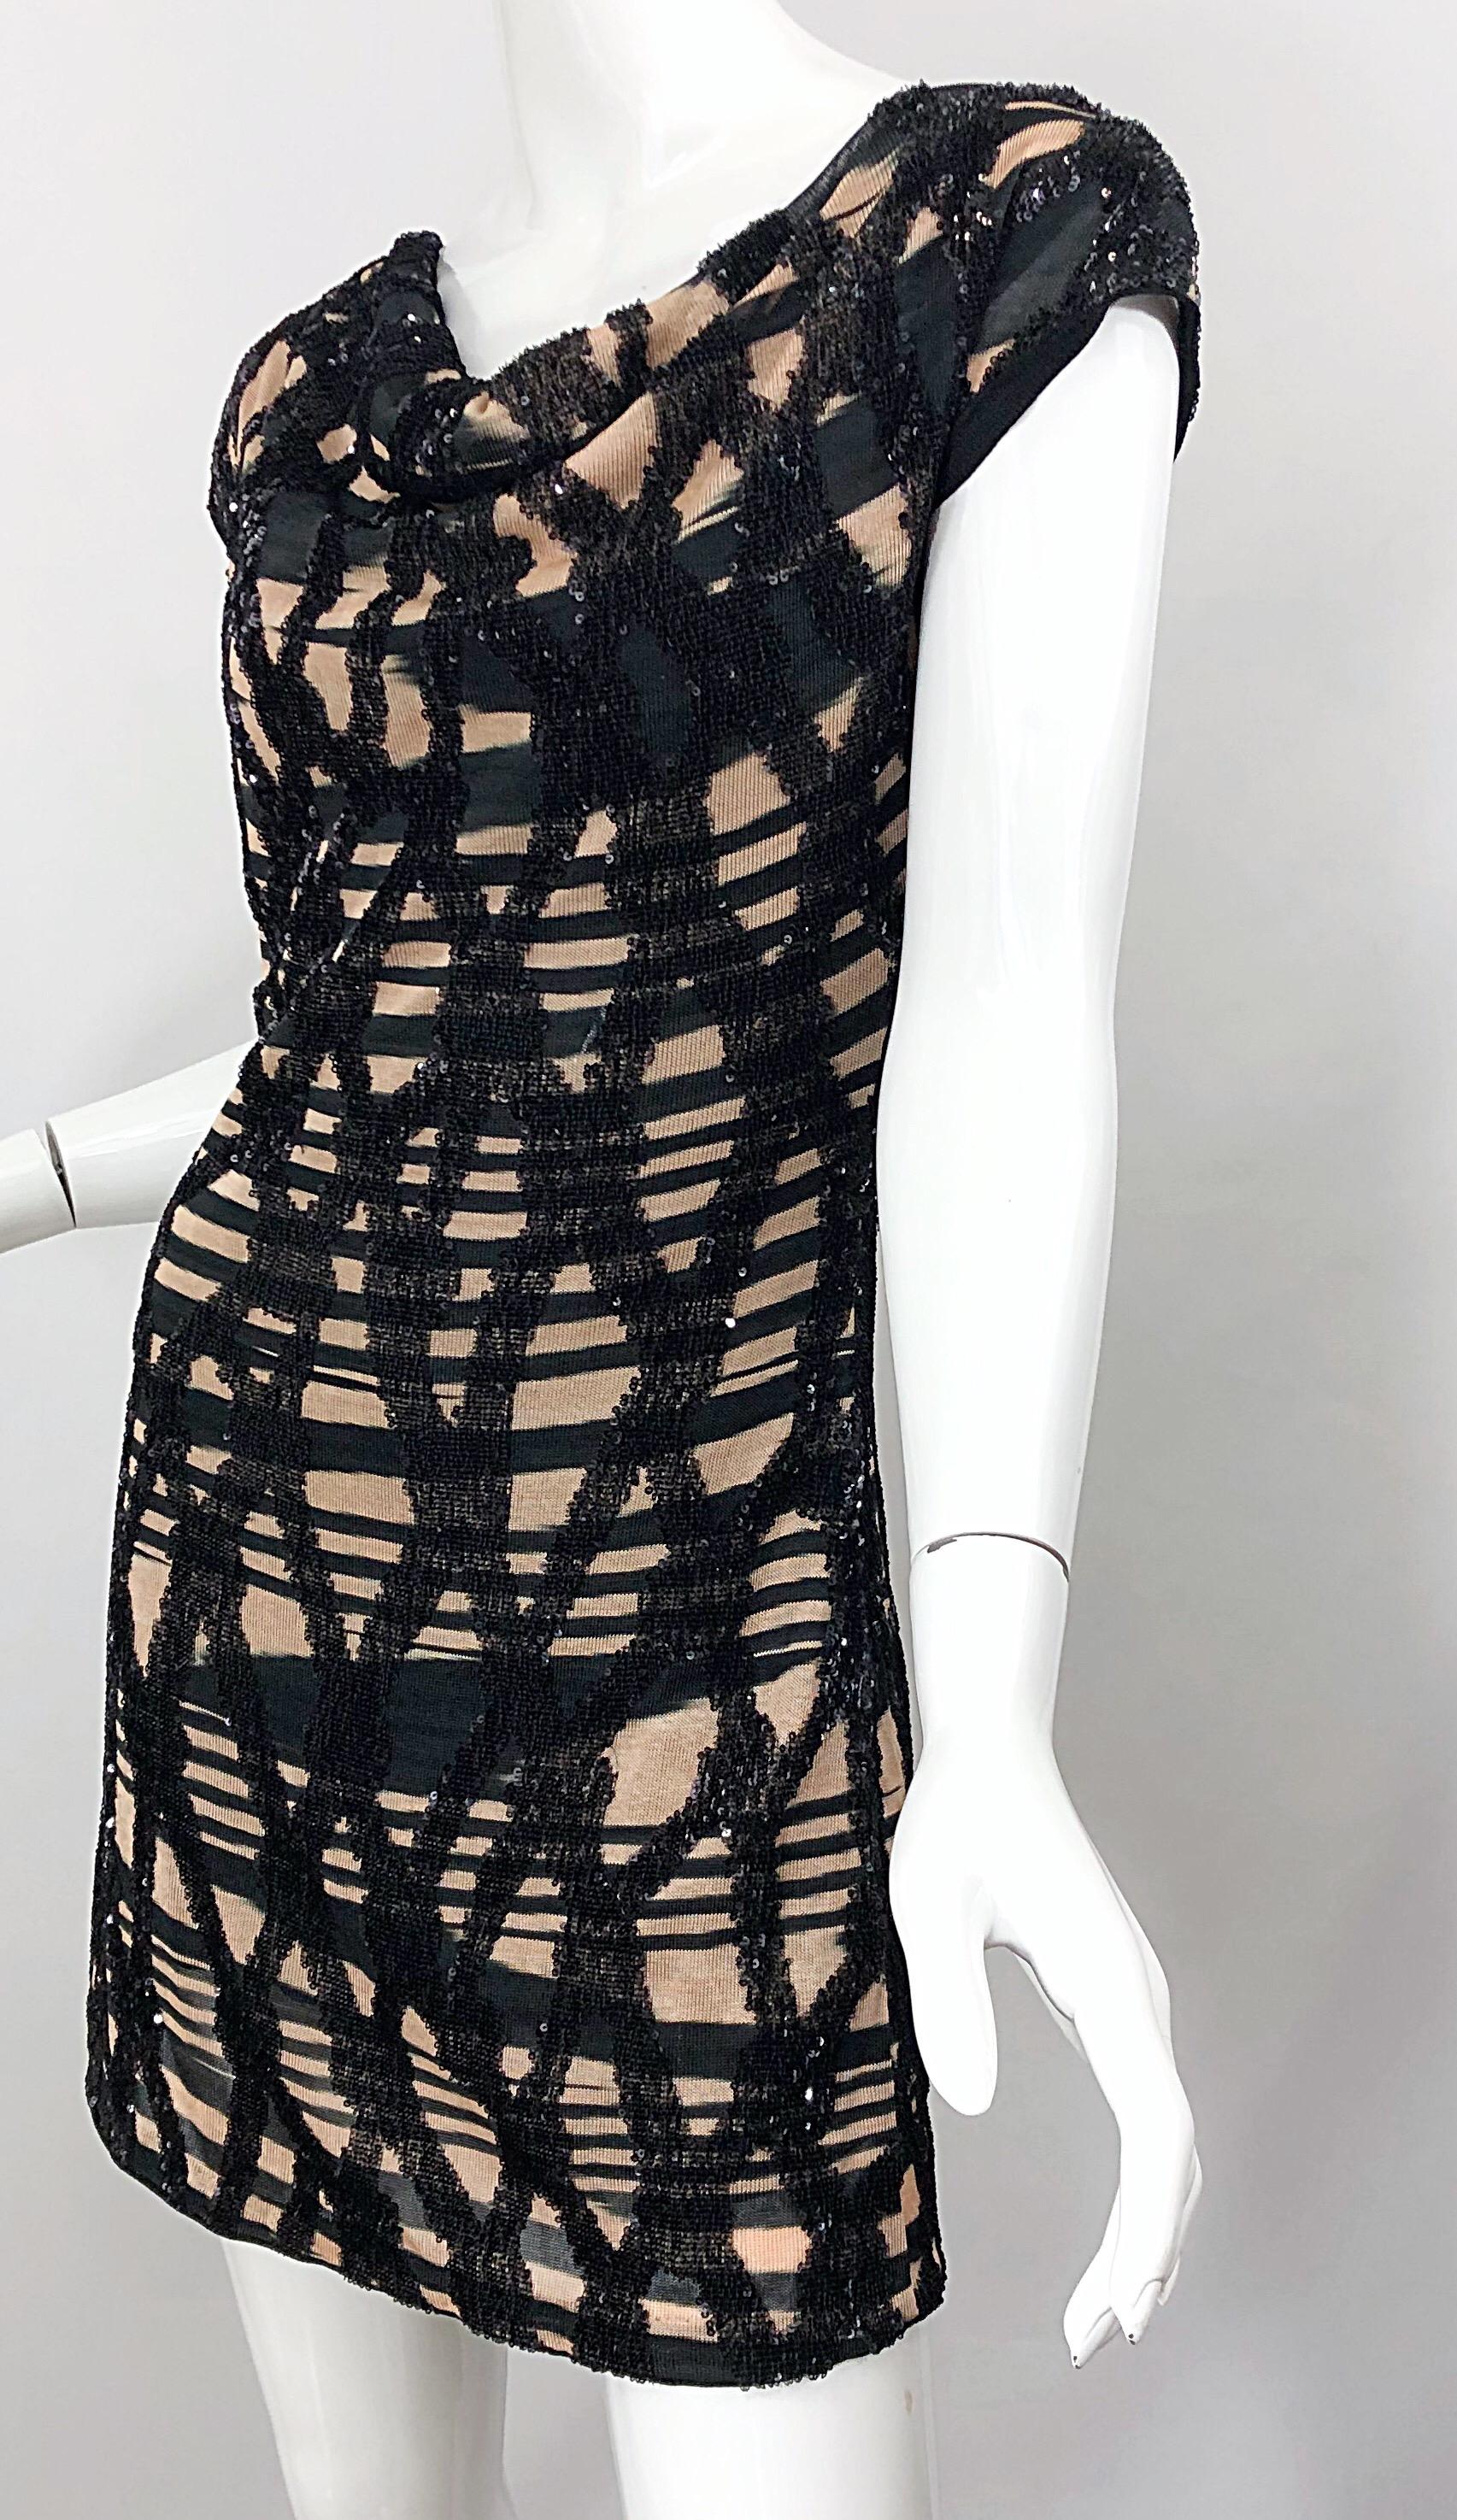 Missoni Early 2000s Black + Nude Sequined Size 40 / 4 - 6 Abstract Mini Dress For Sale 1